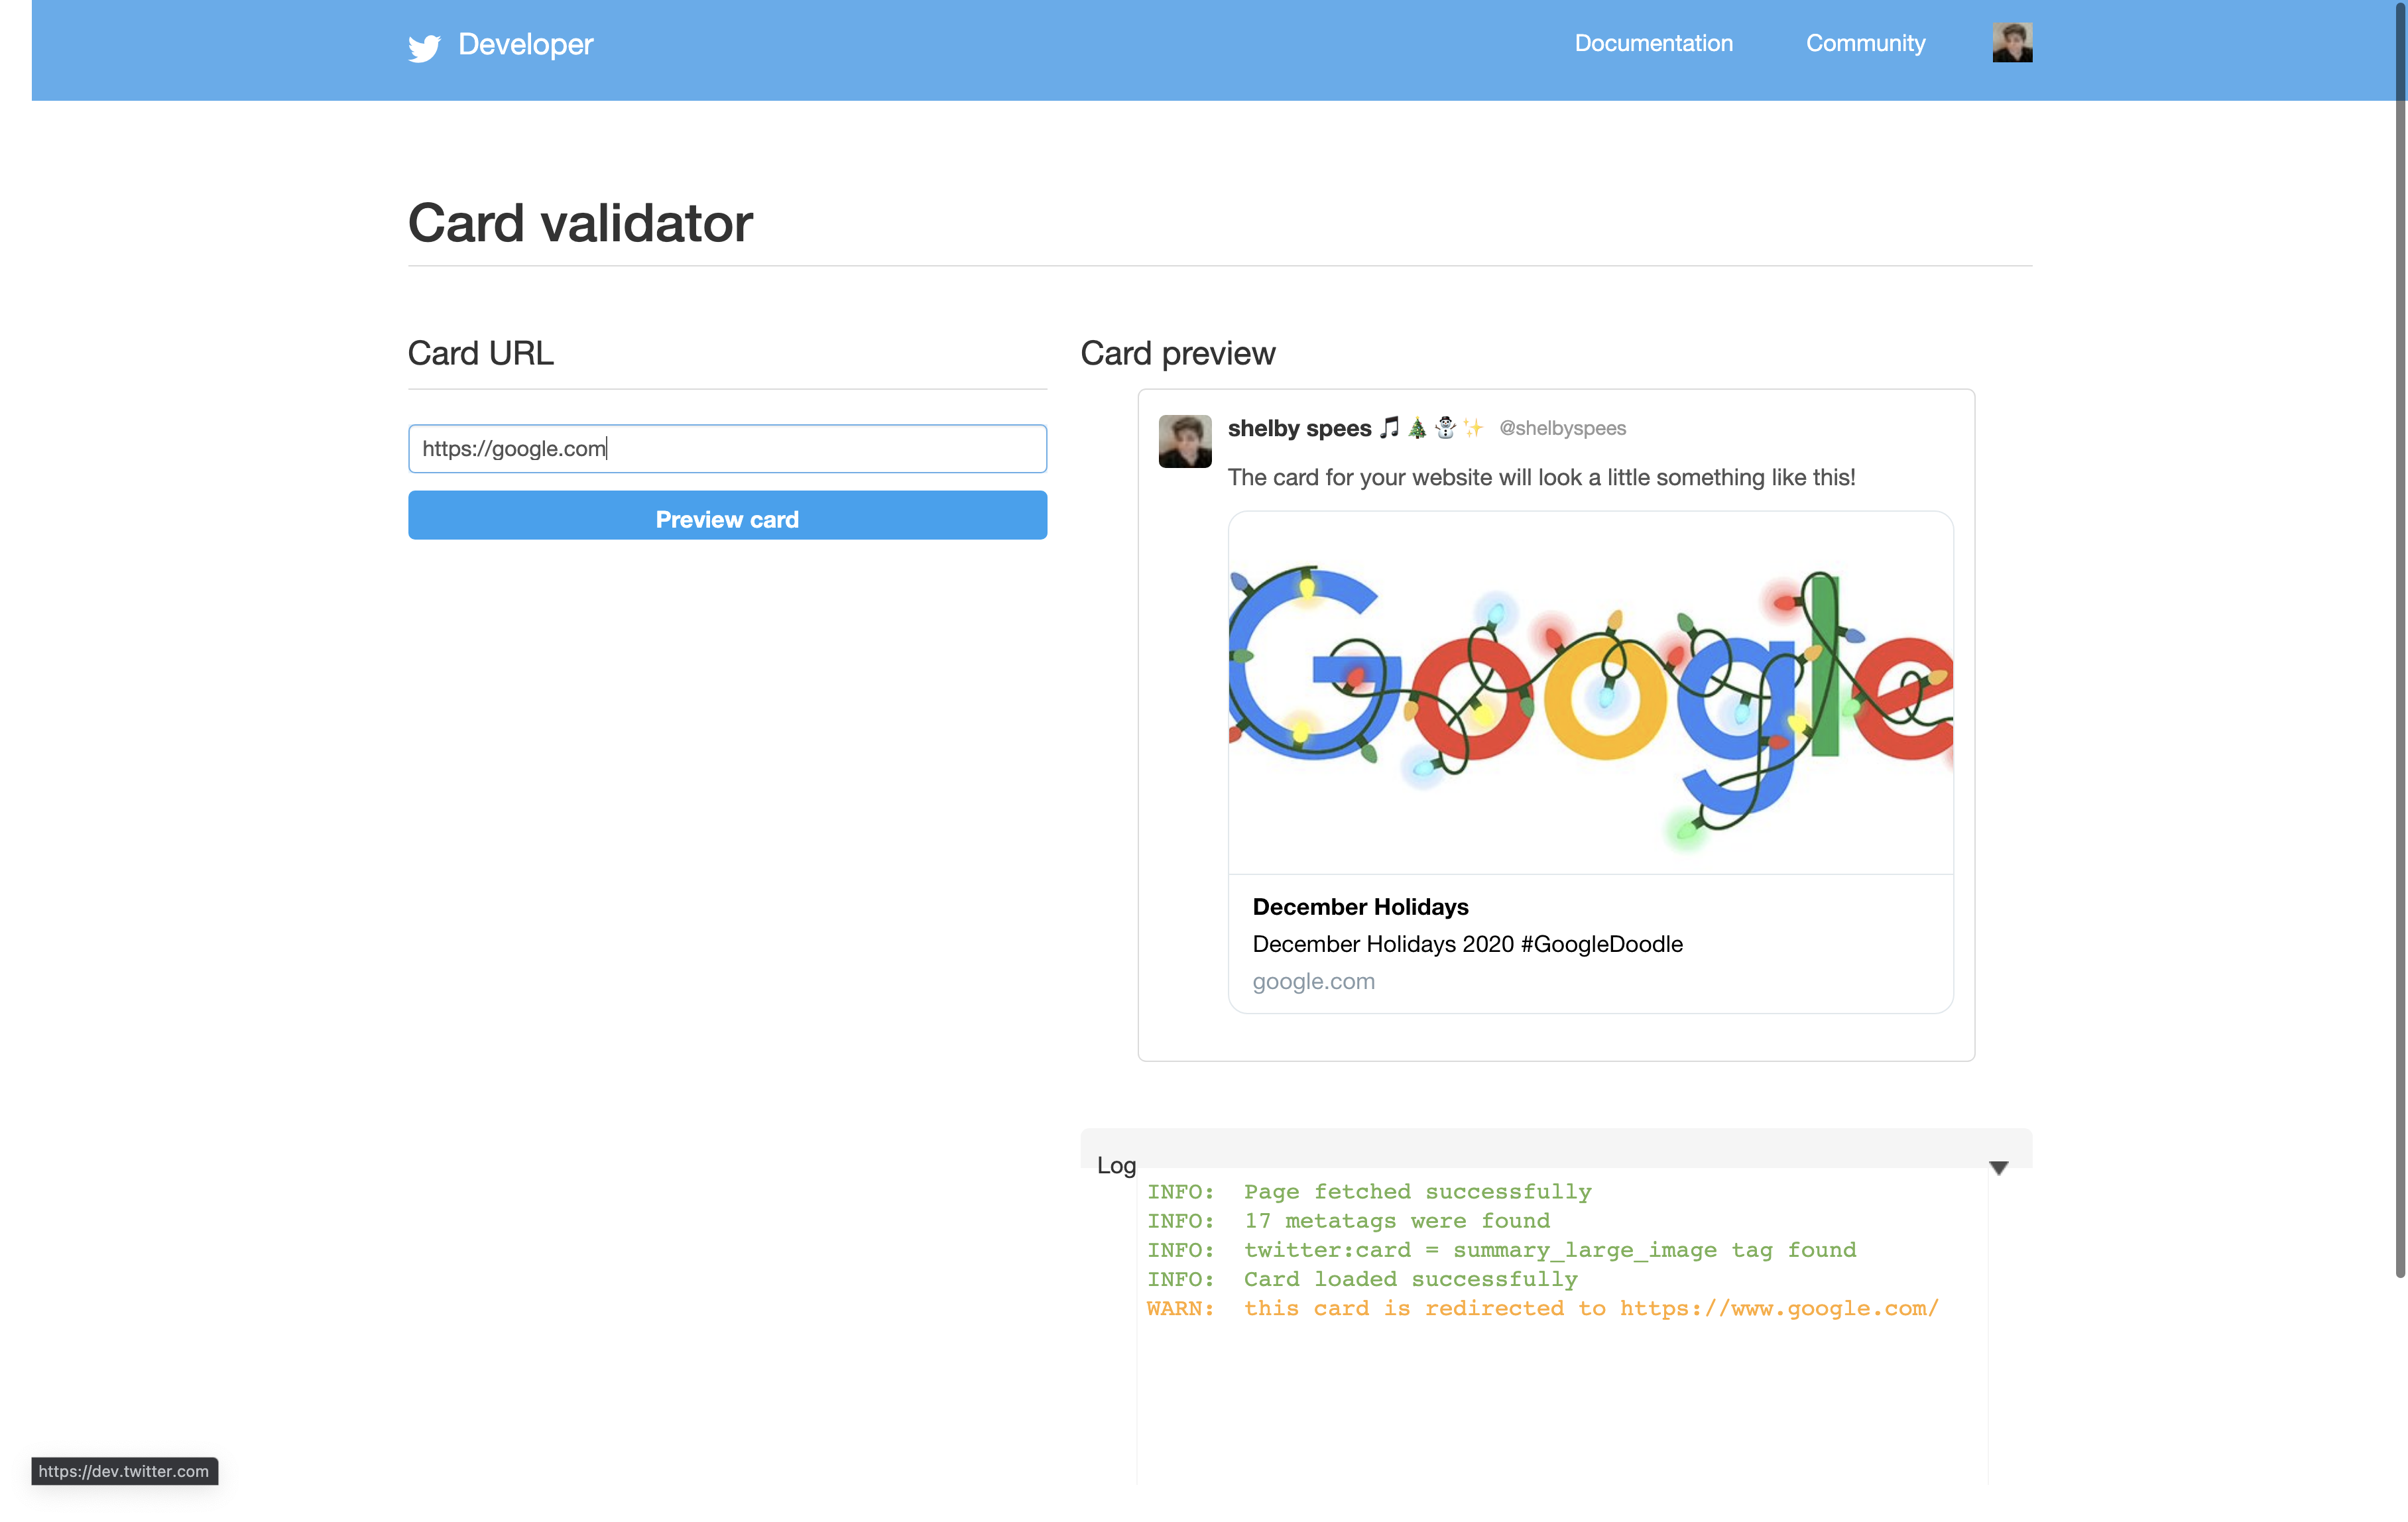 Twitter card validator preview for Google.com, showing the link unfurl with the Google logo decorated for the holidays